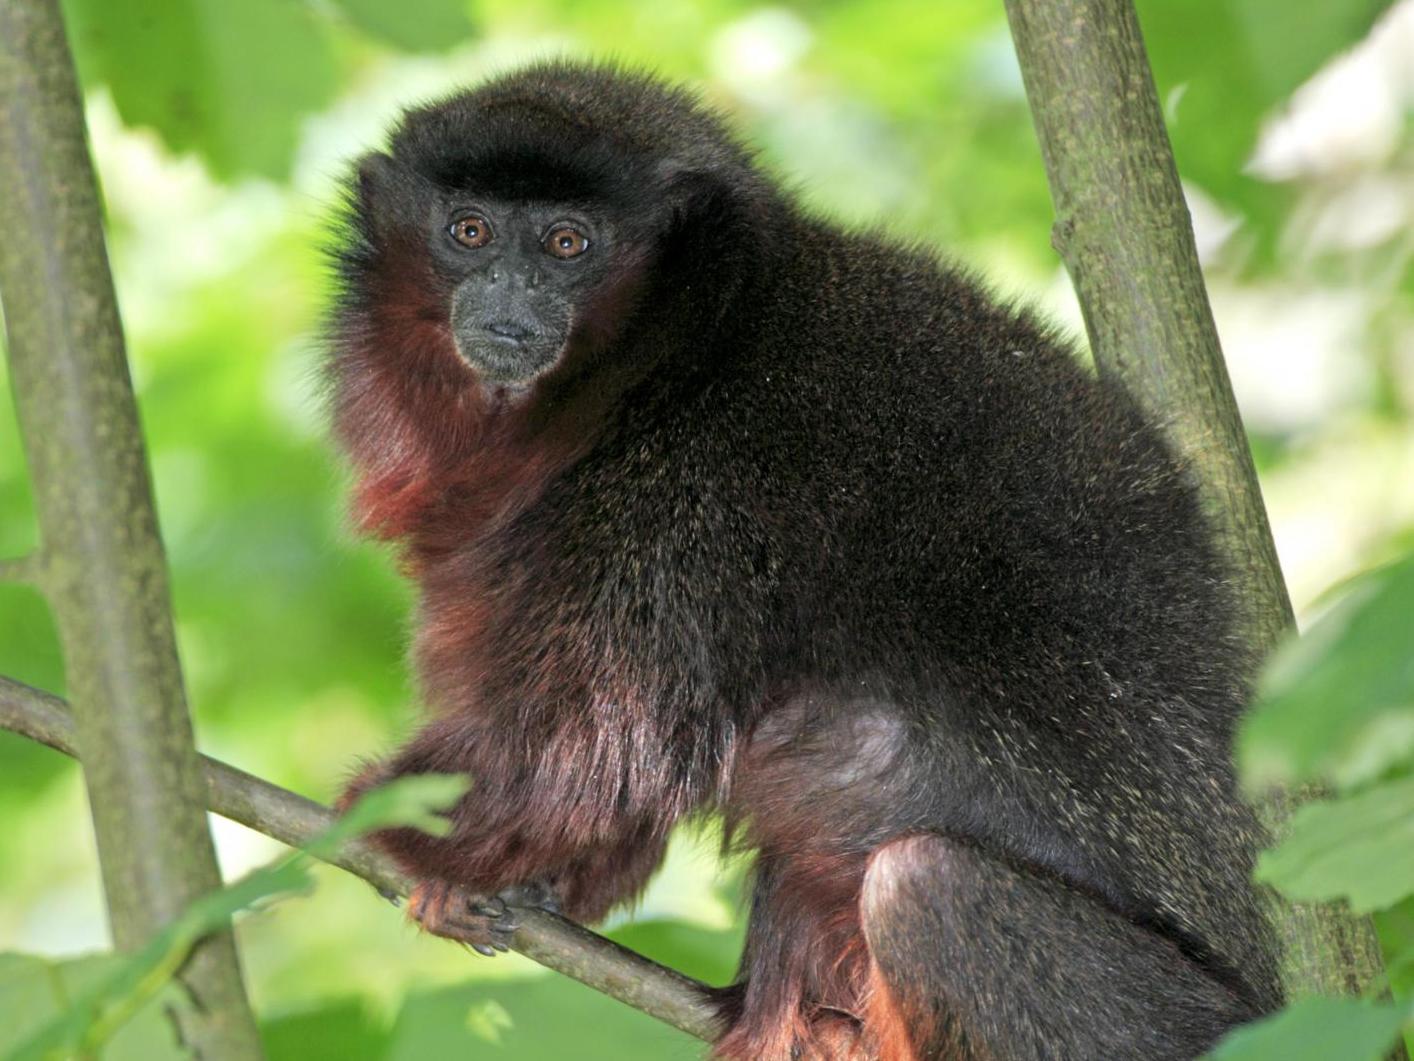 New Species Of Monkey Found In Amazon Rainforest After Being